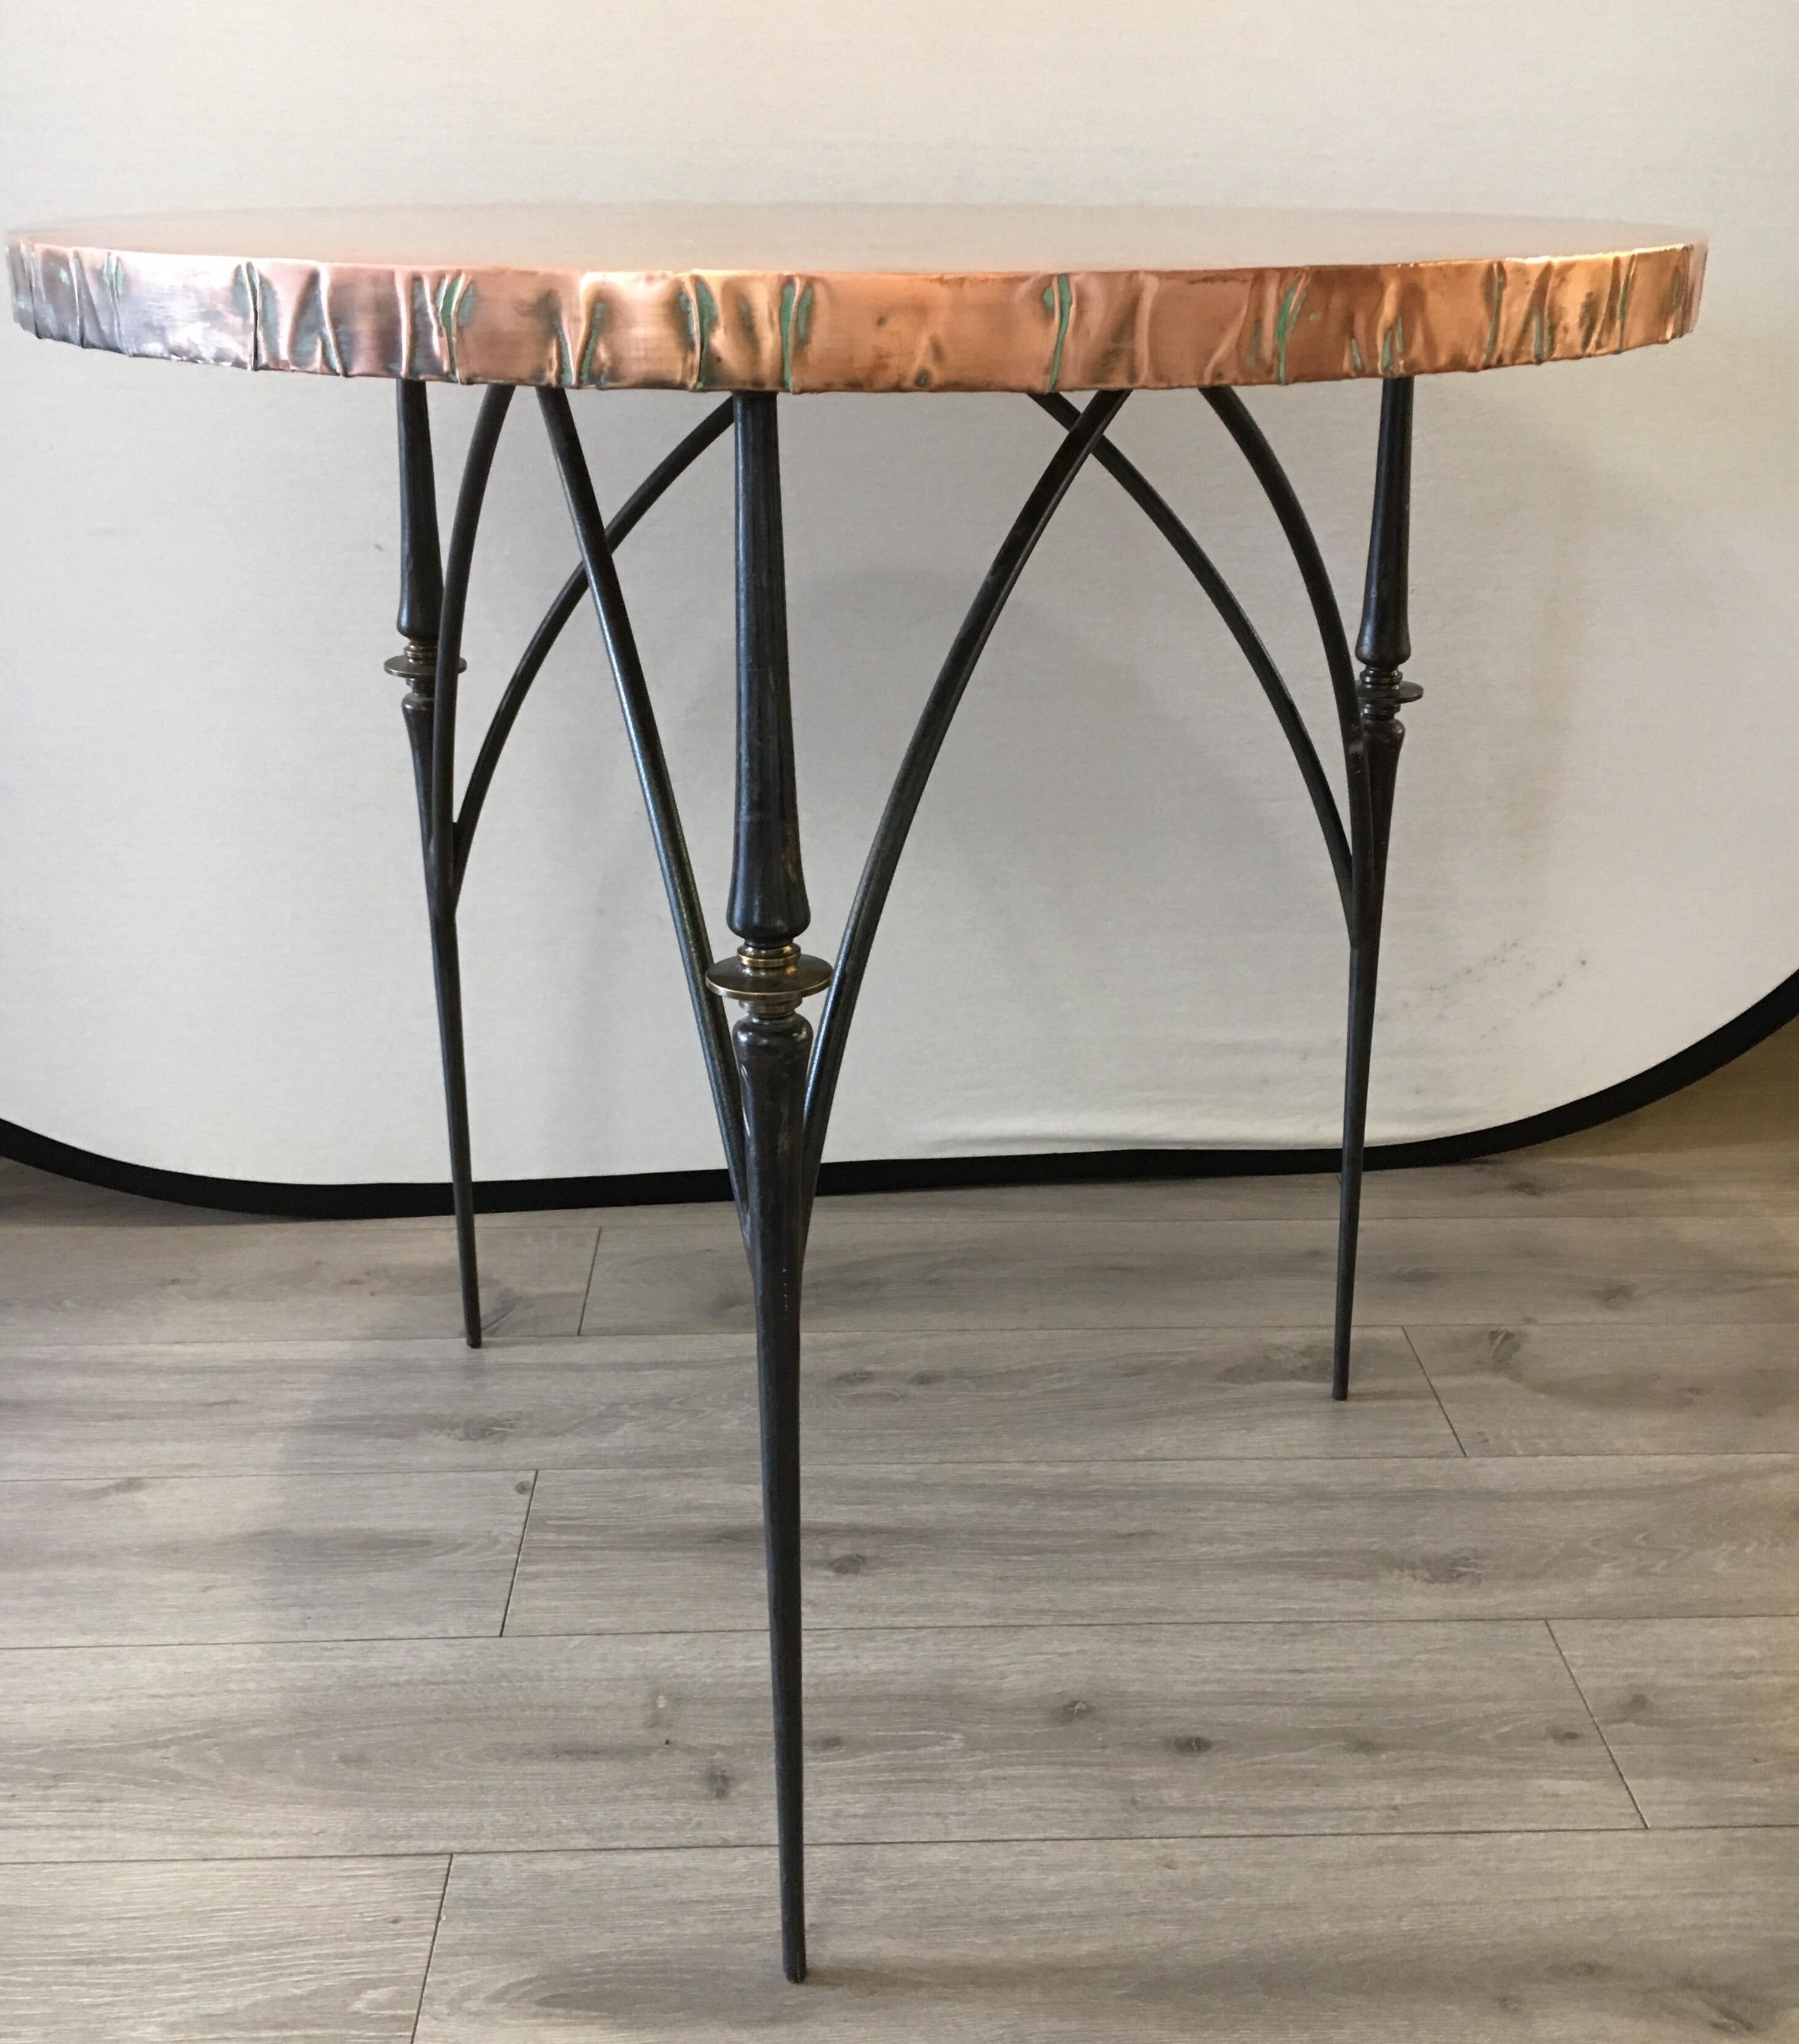 A stunning set of five bespoke foyer or center tables that can also be used as a small dining tables. In the style of some of the best studio furniture of designers like Paul Evans, this piece has the elemental presence of a modern sculpture. From